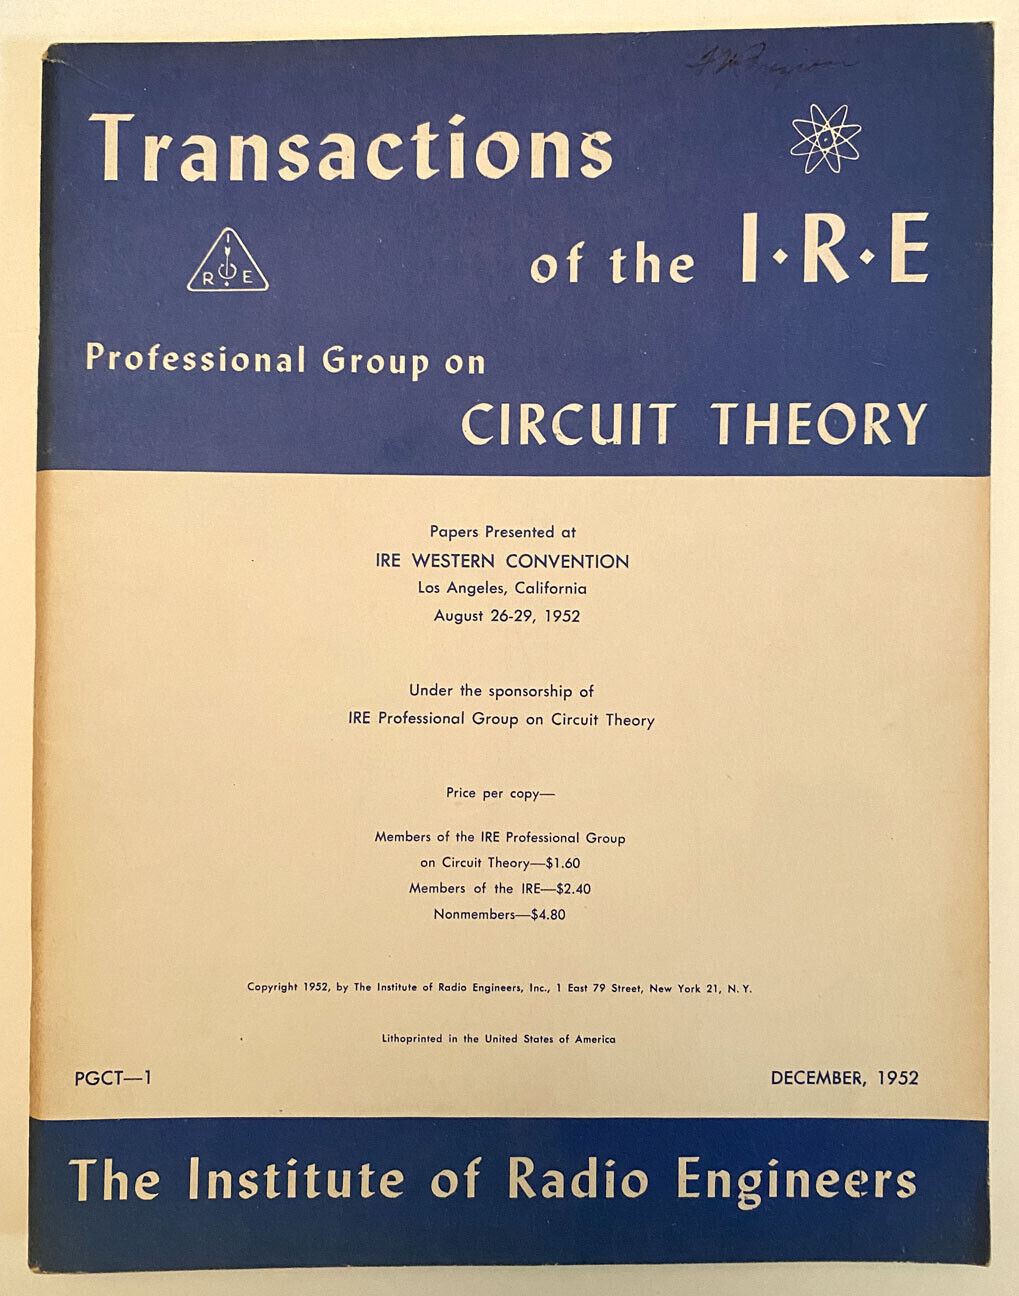 Transactions Of The I.R.E. Circuit Theory PGCT-1 Dec. 1952 1st Issue Rare